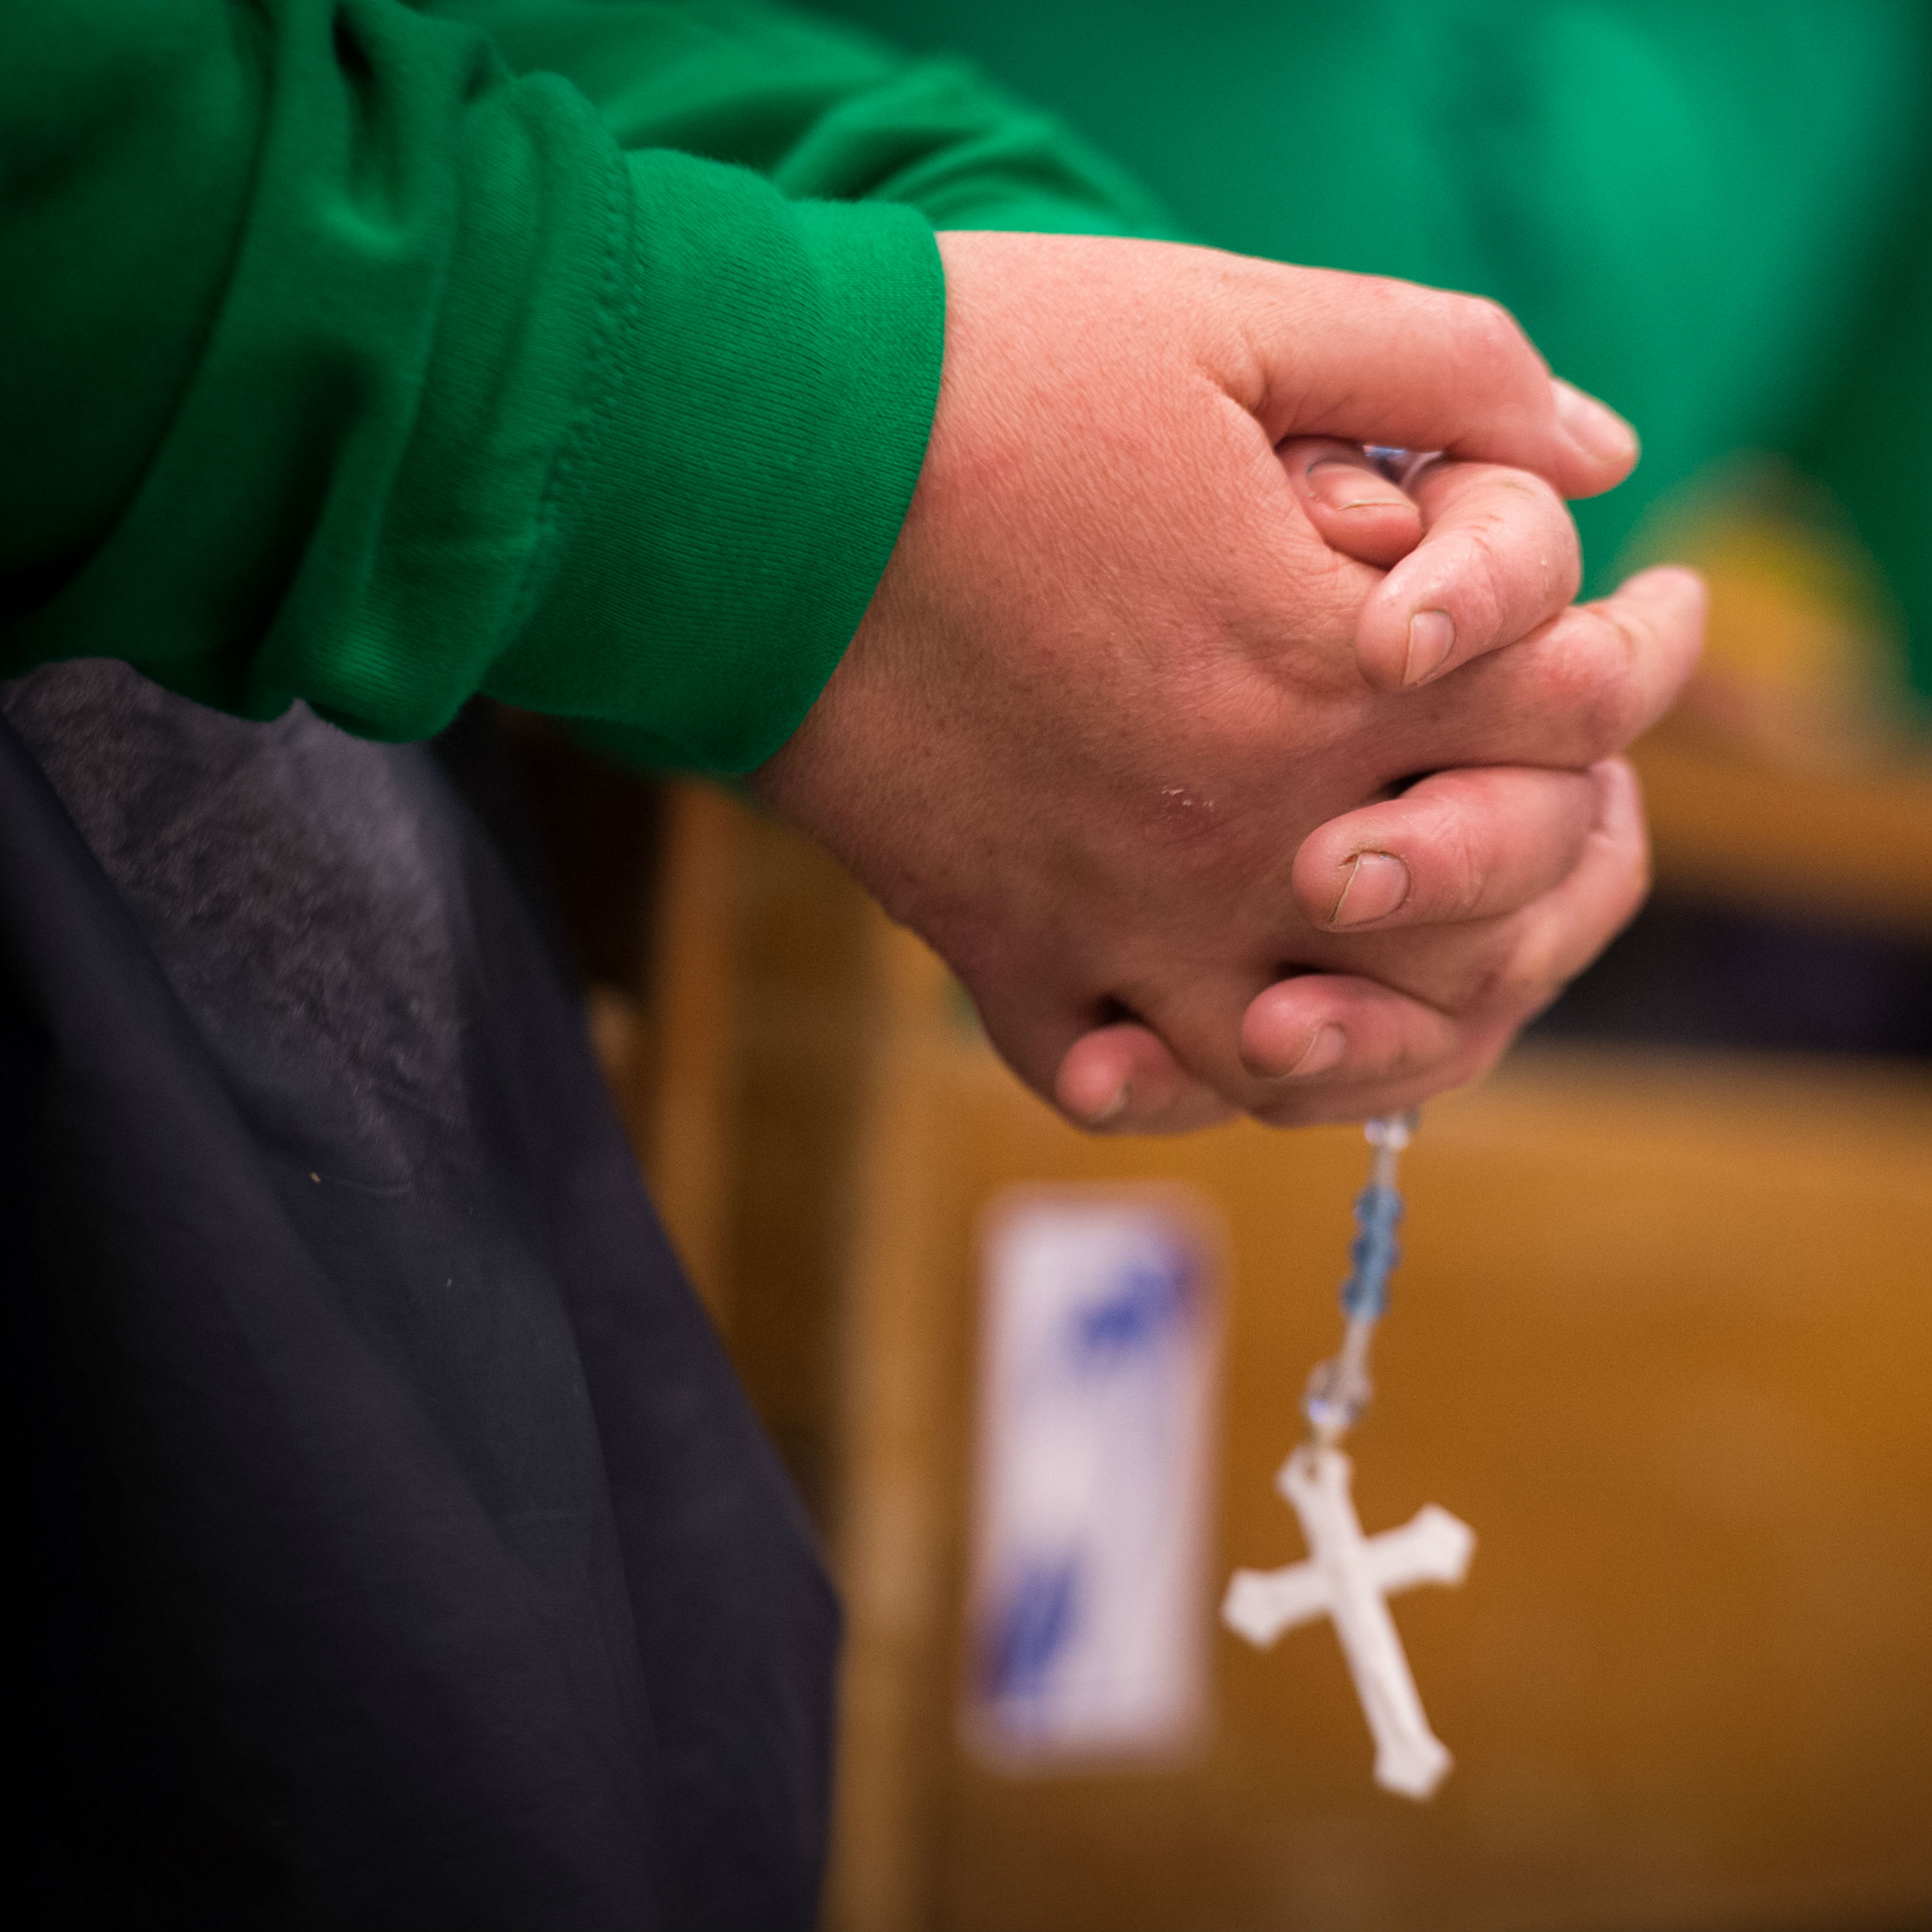 A quarter of Catholic prisoners face obstacles practising their faith